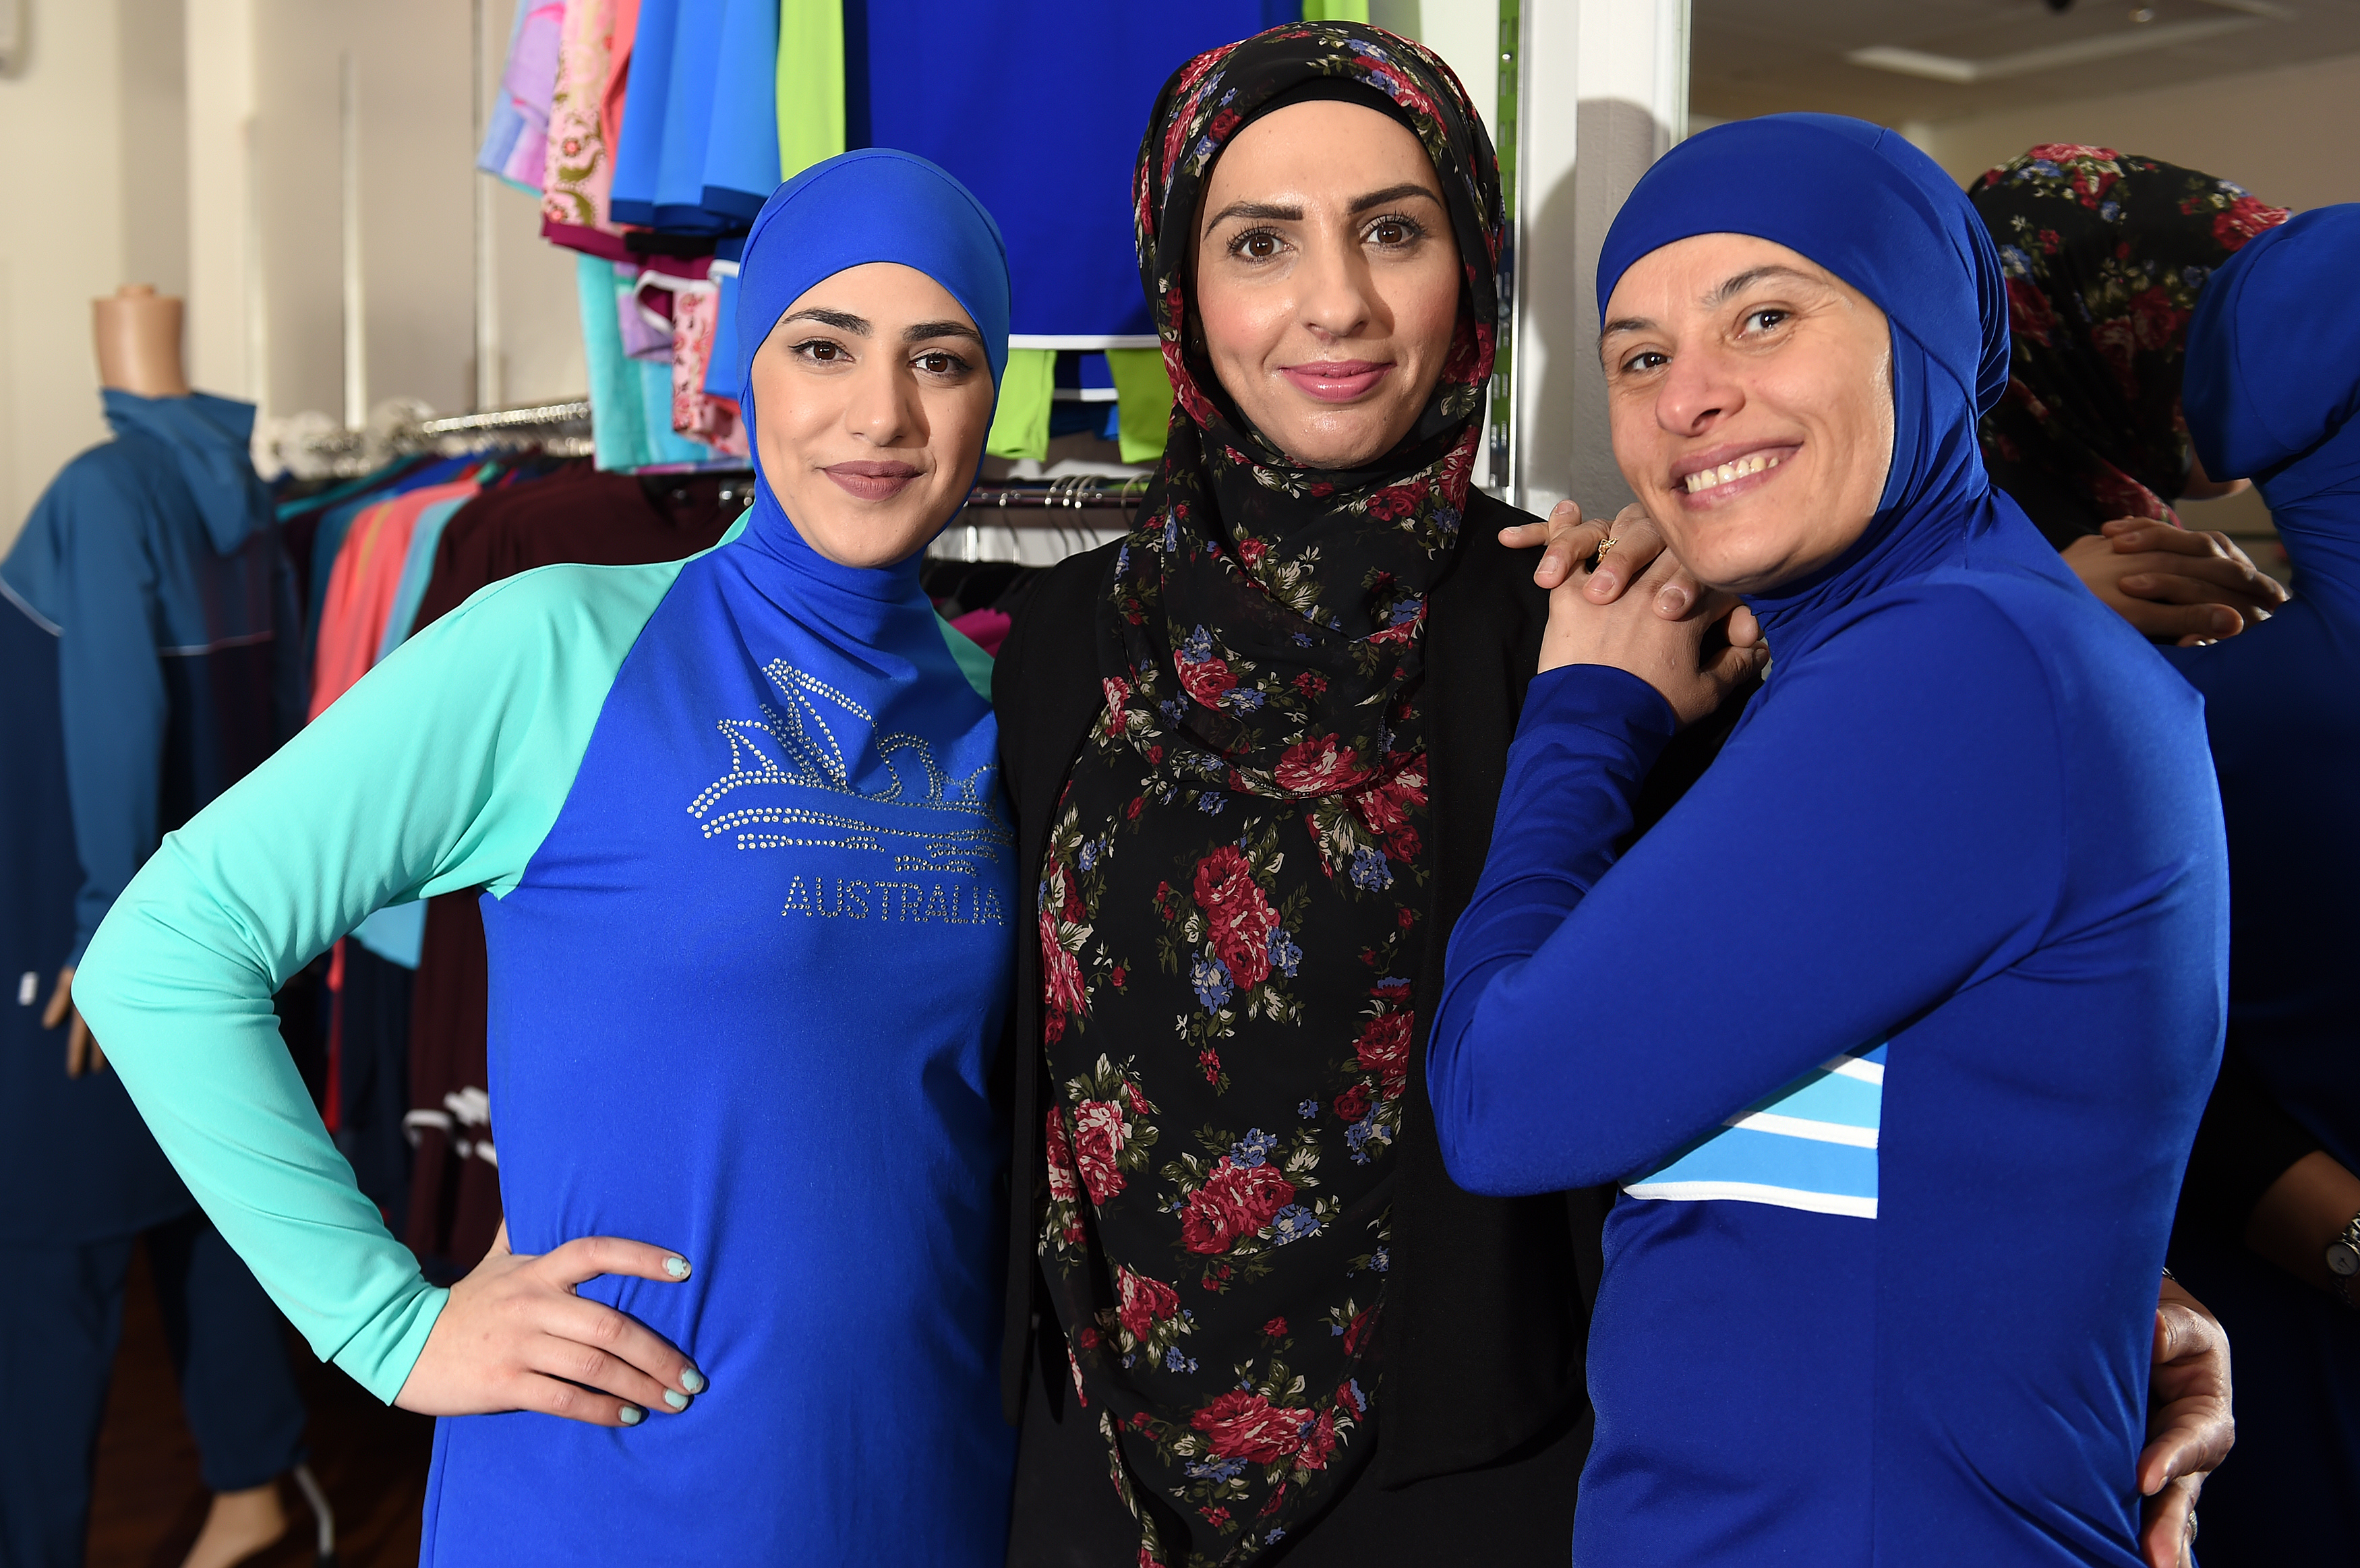 Muslim models display burkini swimsuits at a shop in western Sydney on August 19, 2016. (Saeed Khan—AFP/Getty Images)